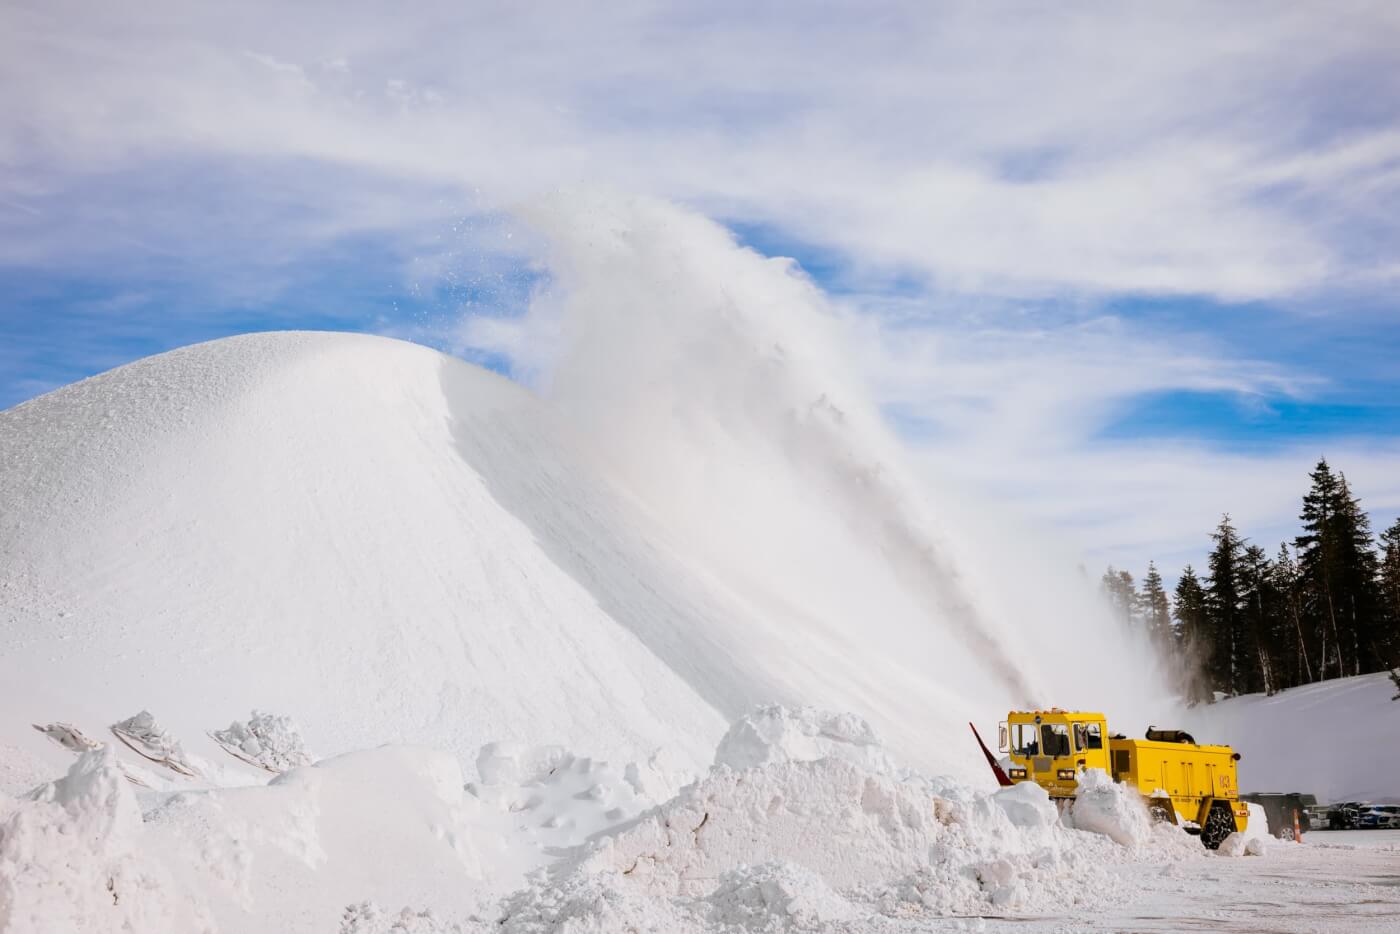 Snow plow blowing snow onto a very high snow pile